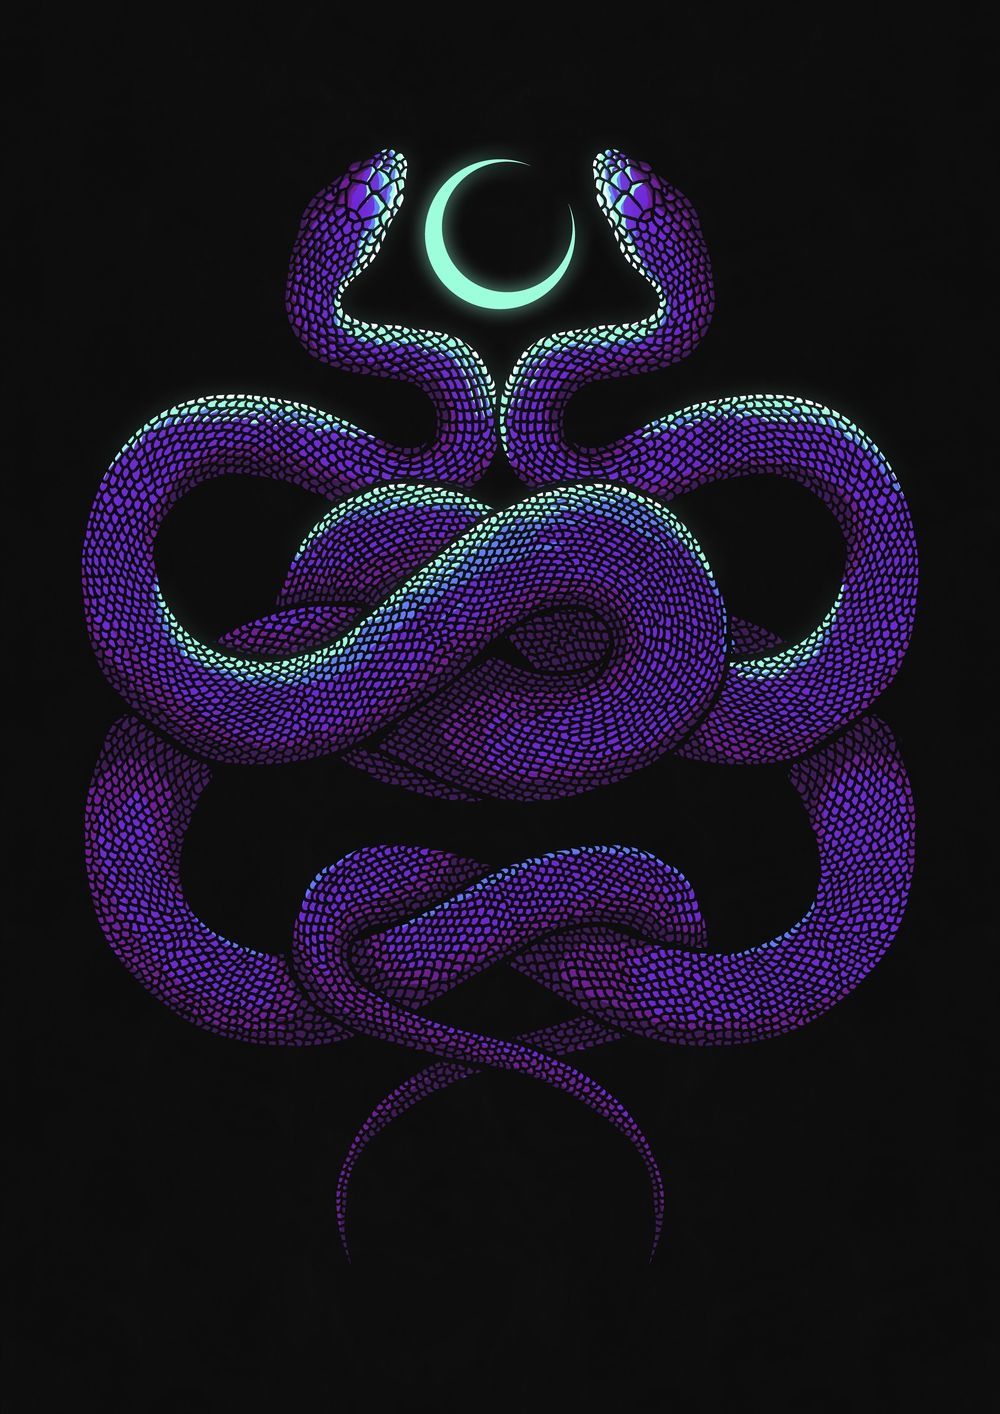 Purple snakes intertwined with a crescent moon - Snake